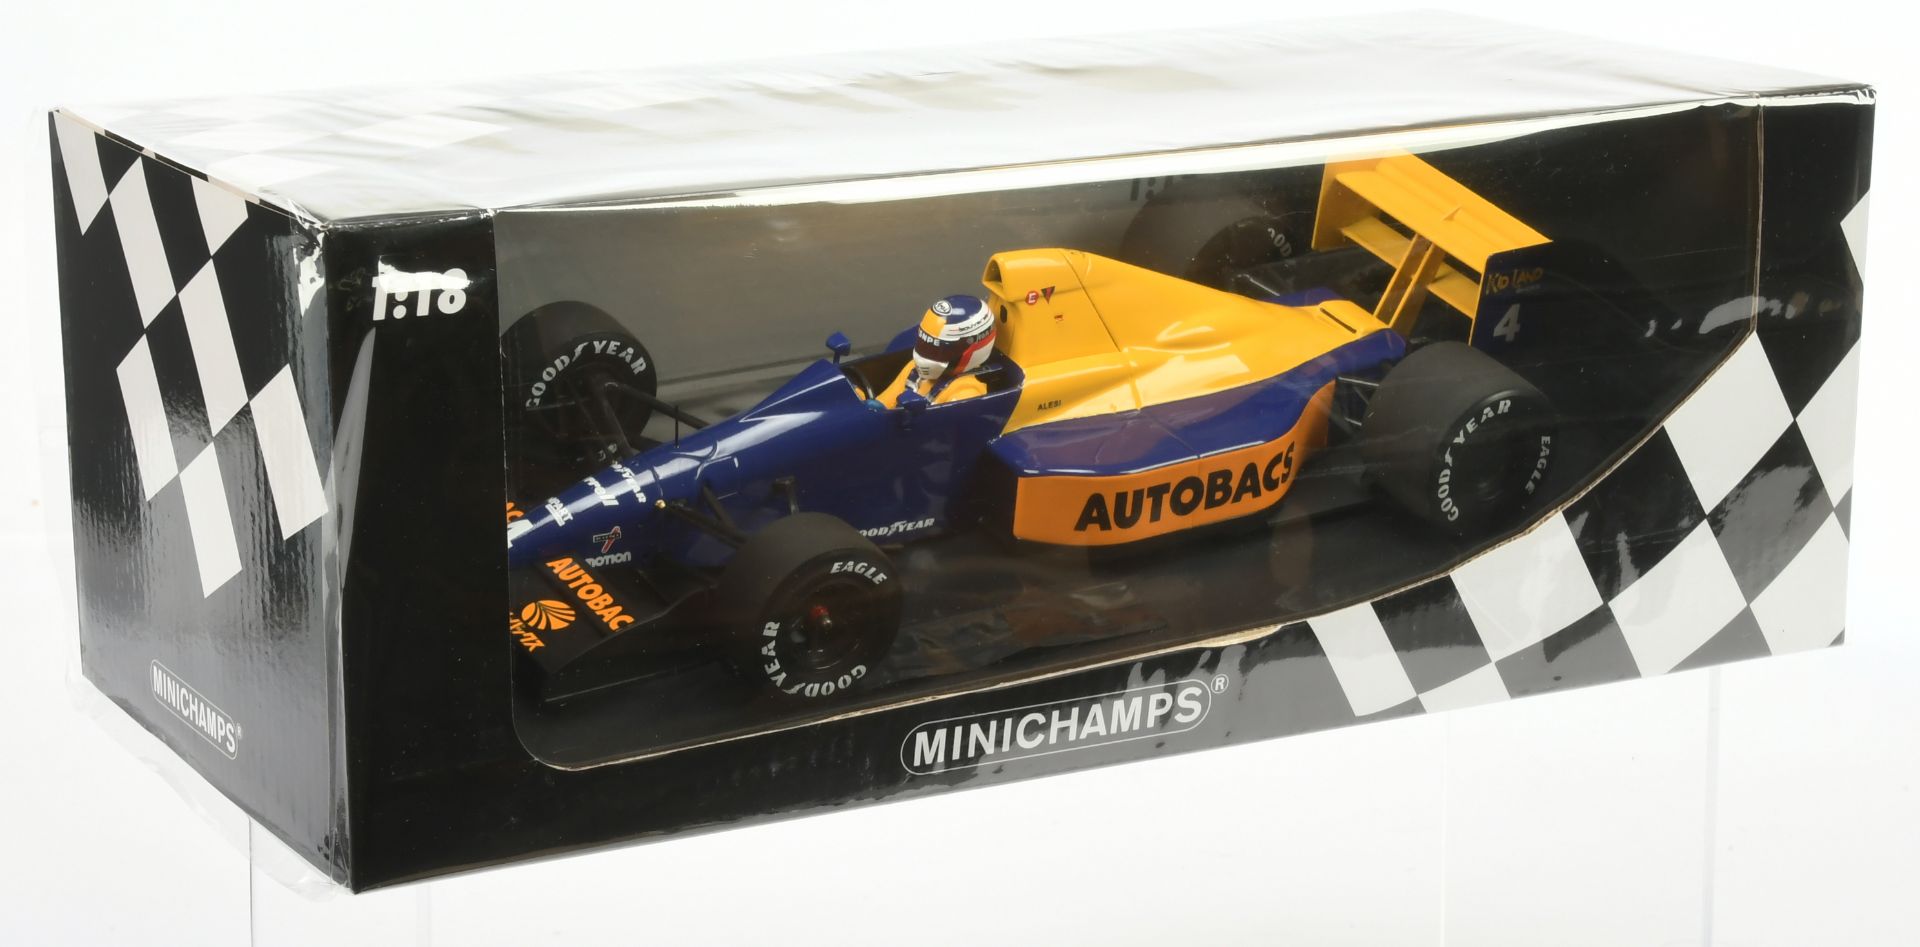 Minichamps 1:18 scale Tyrrell Ford 018 J. Alesi Japanese GP 1989 Limited Edition 300 pcs